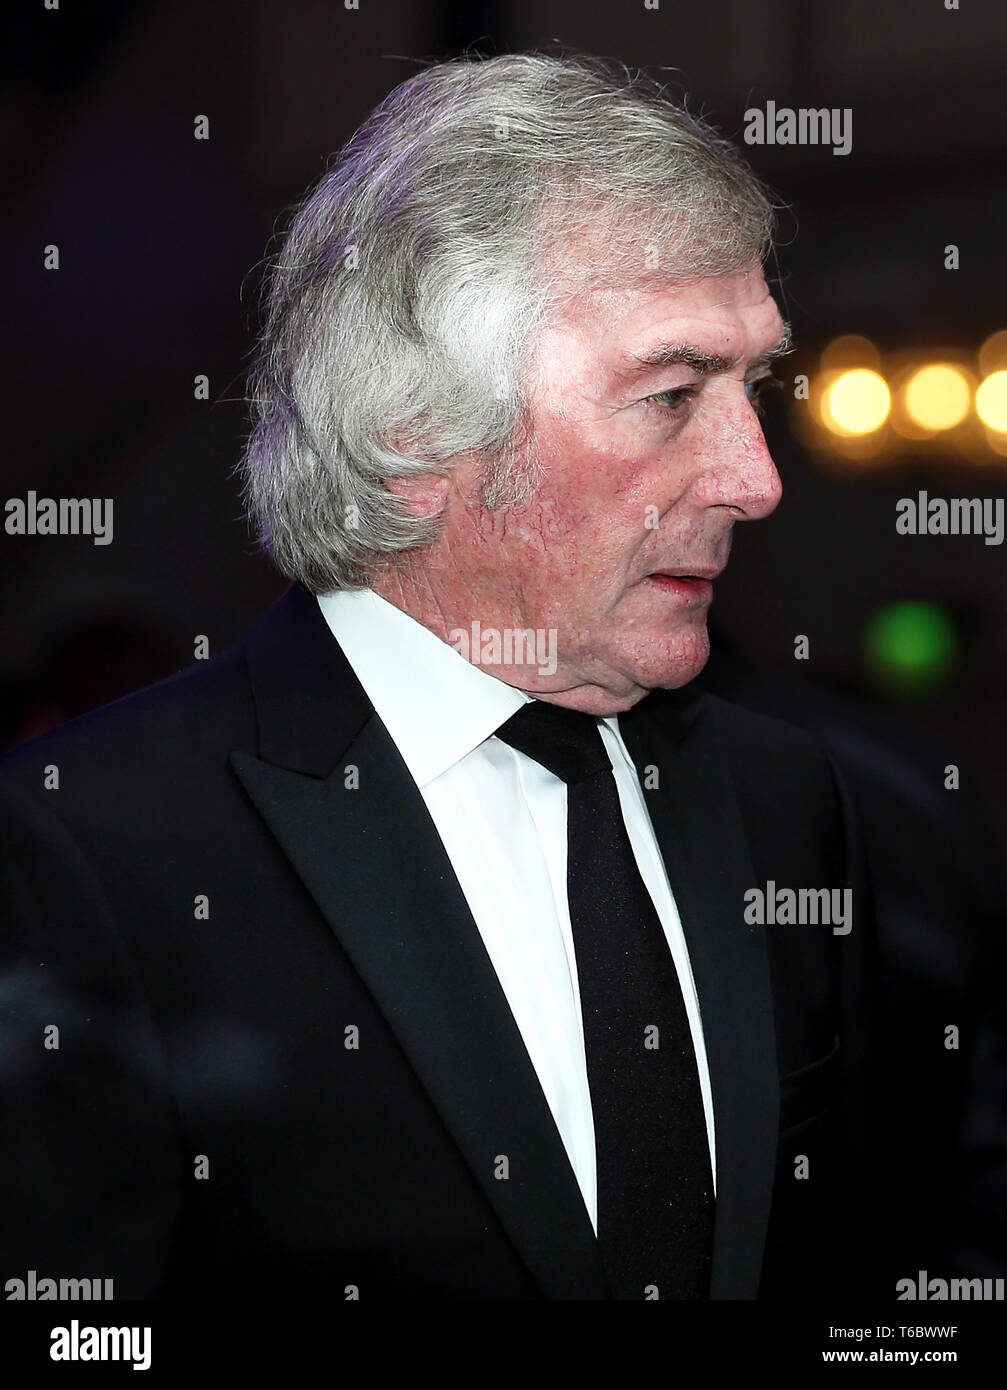 Pat Jennings during the 2019 PFA Awards at the Grosvenor House Hotel, London. PRESS ASSOCIATION Photo. Picture date: Sunday April 28, 2019. See PA story SOCCER PFA. Photo credit should read: Steven Paston/PA Wire Stock Photo